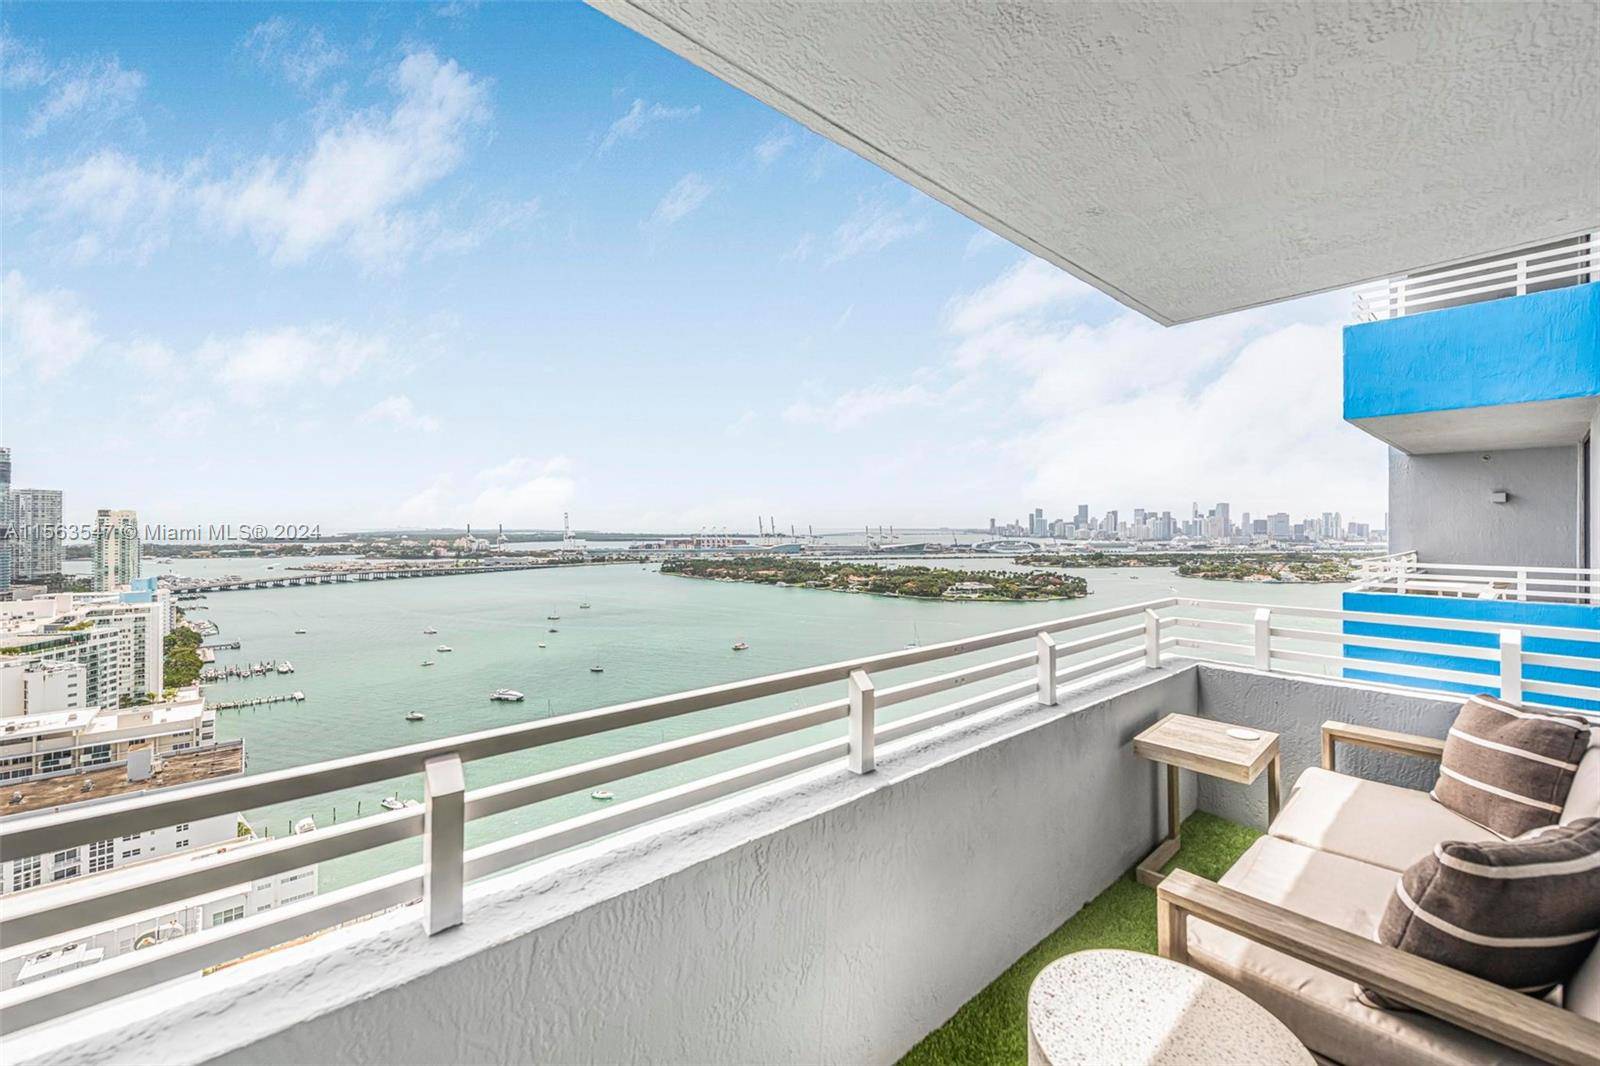 Miami lifestyle embodied in an exquisite high rise, boasting stunning panoramic views of the city skyline and bay.